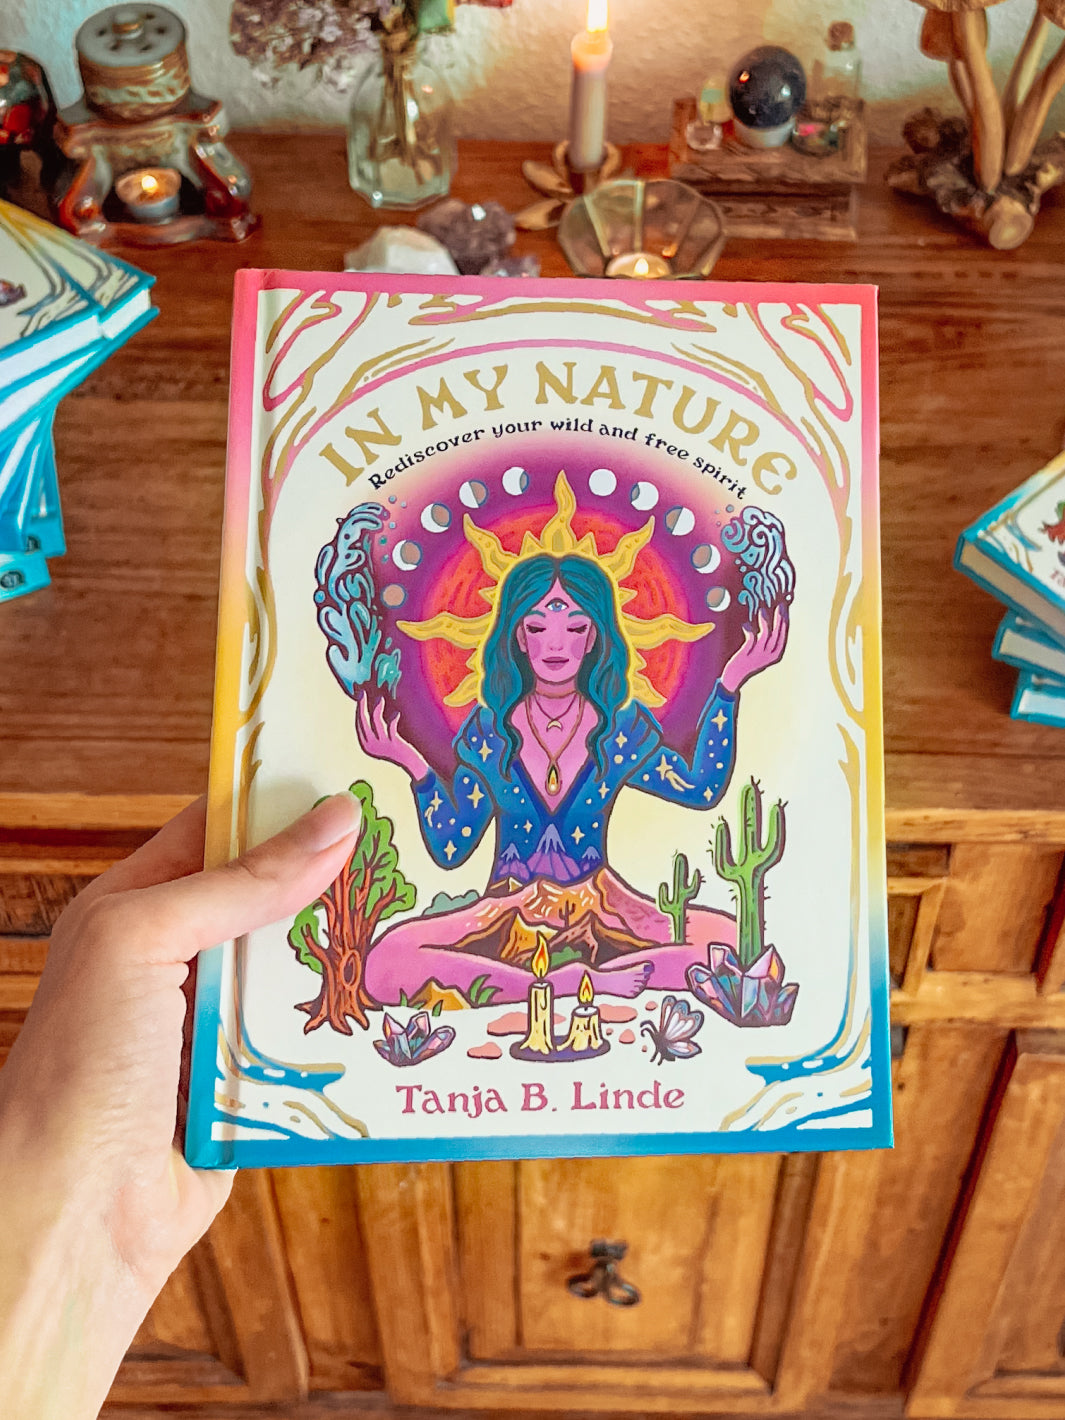 IN MY NATURE - REDISCOVER YOUR OWN WILD & FREE SPIRIT BOOK